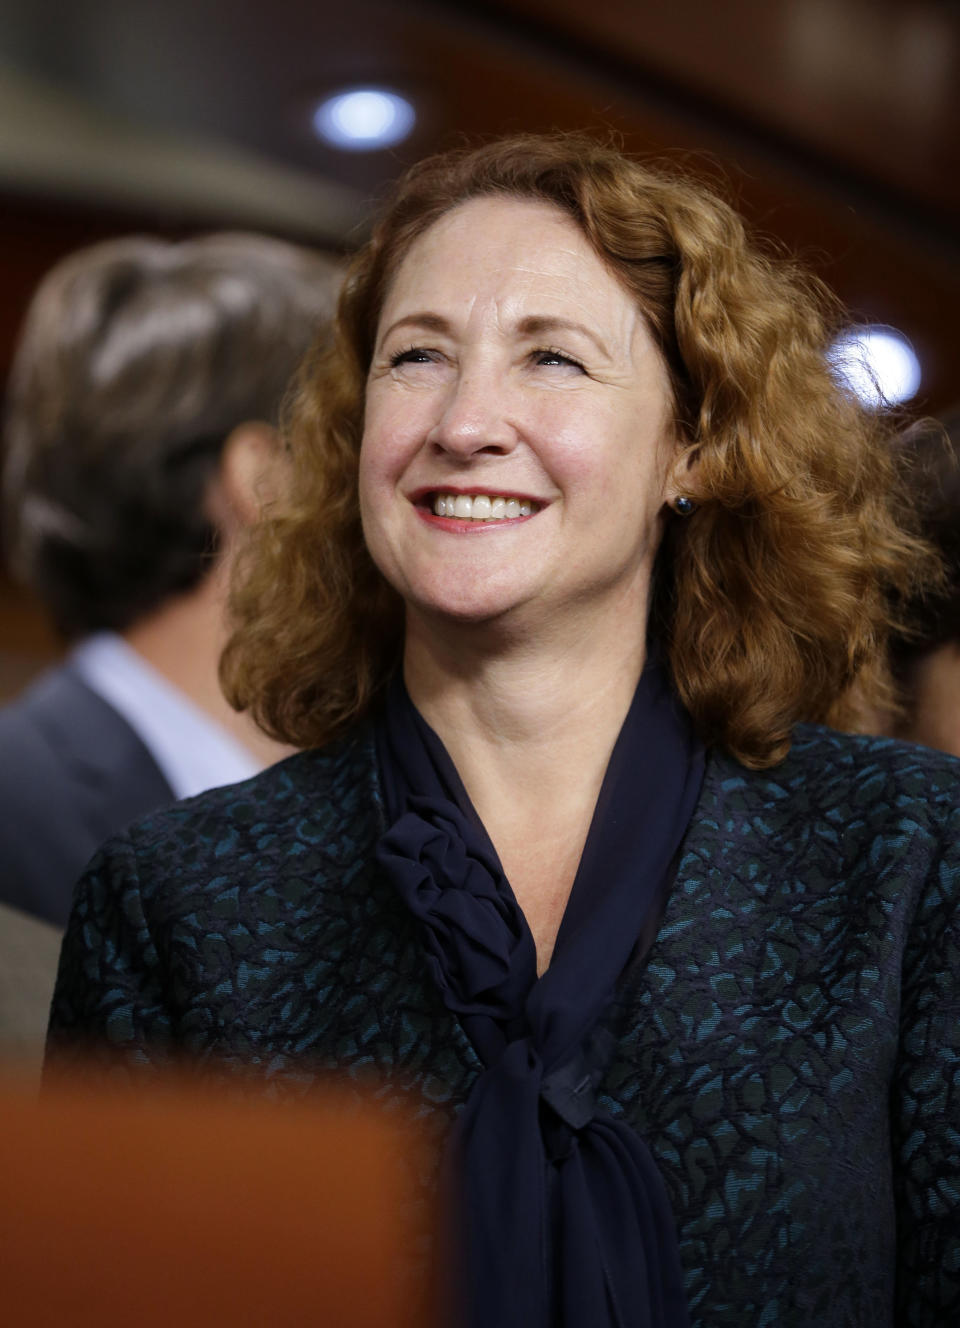 Rep.-elect Elizabeth Esty, D-Conn. is seen on stage during a news conference with newly elected Democratic House members, on Capitol Hill in Washington, Tuesday, Nov. 13, 2012. (AP Photo/Pablo Martinez Monsivais) 